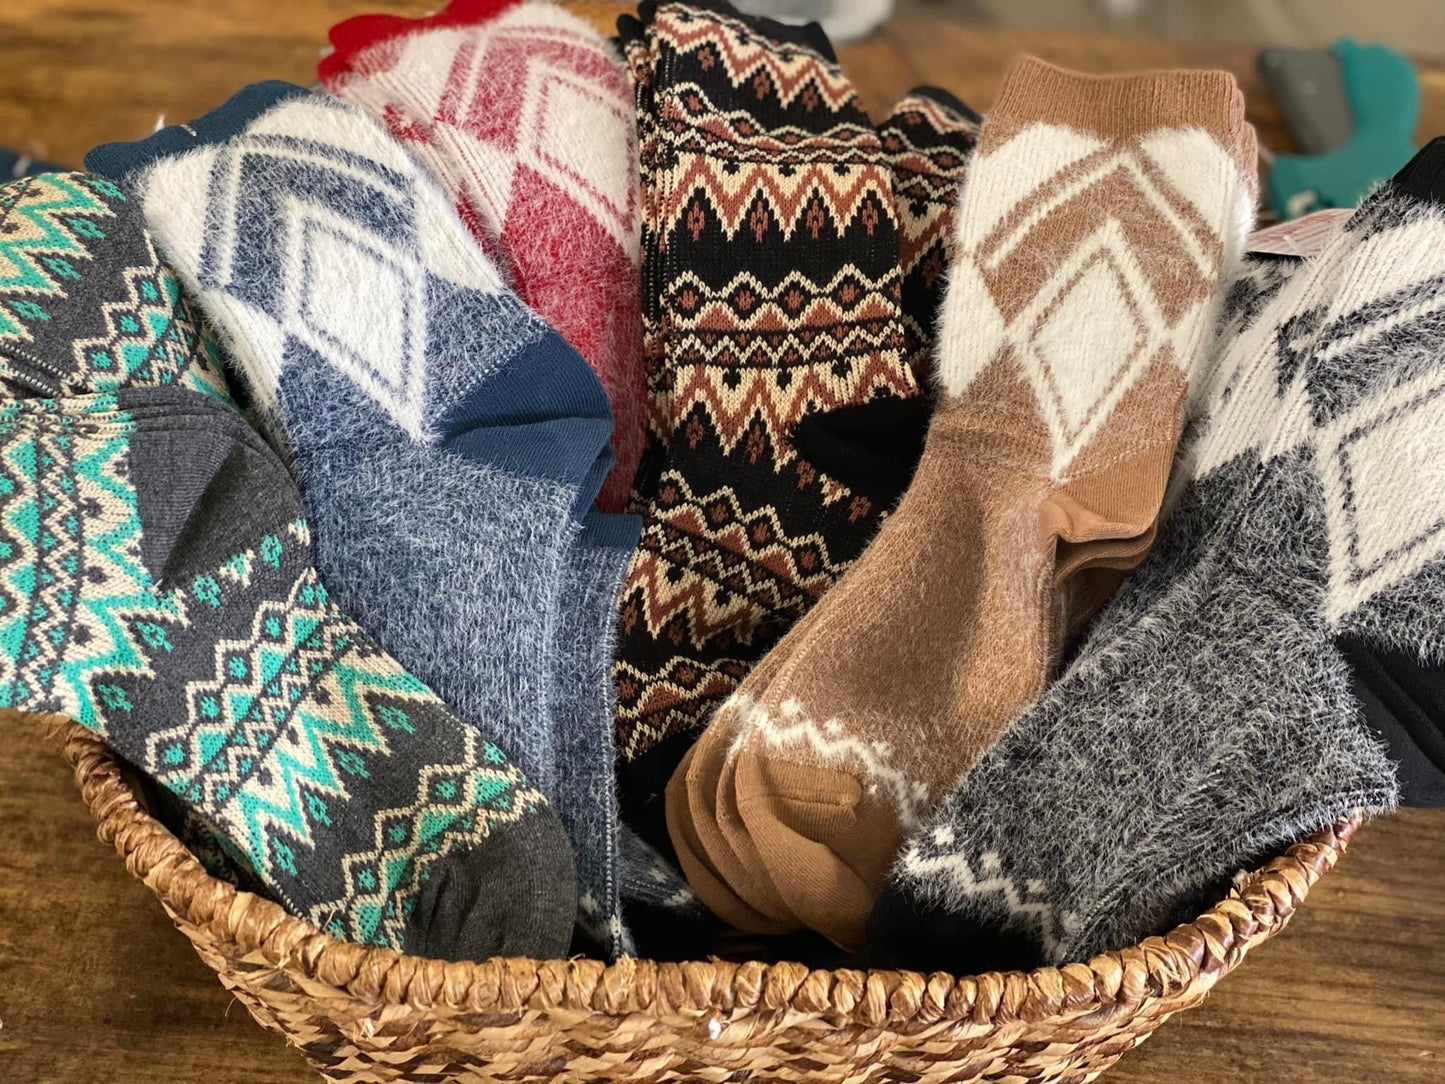 Cozy and Comfy Pattern Socks